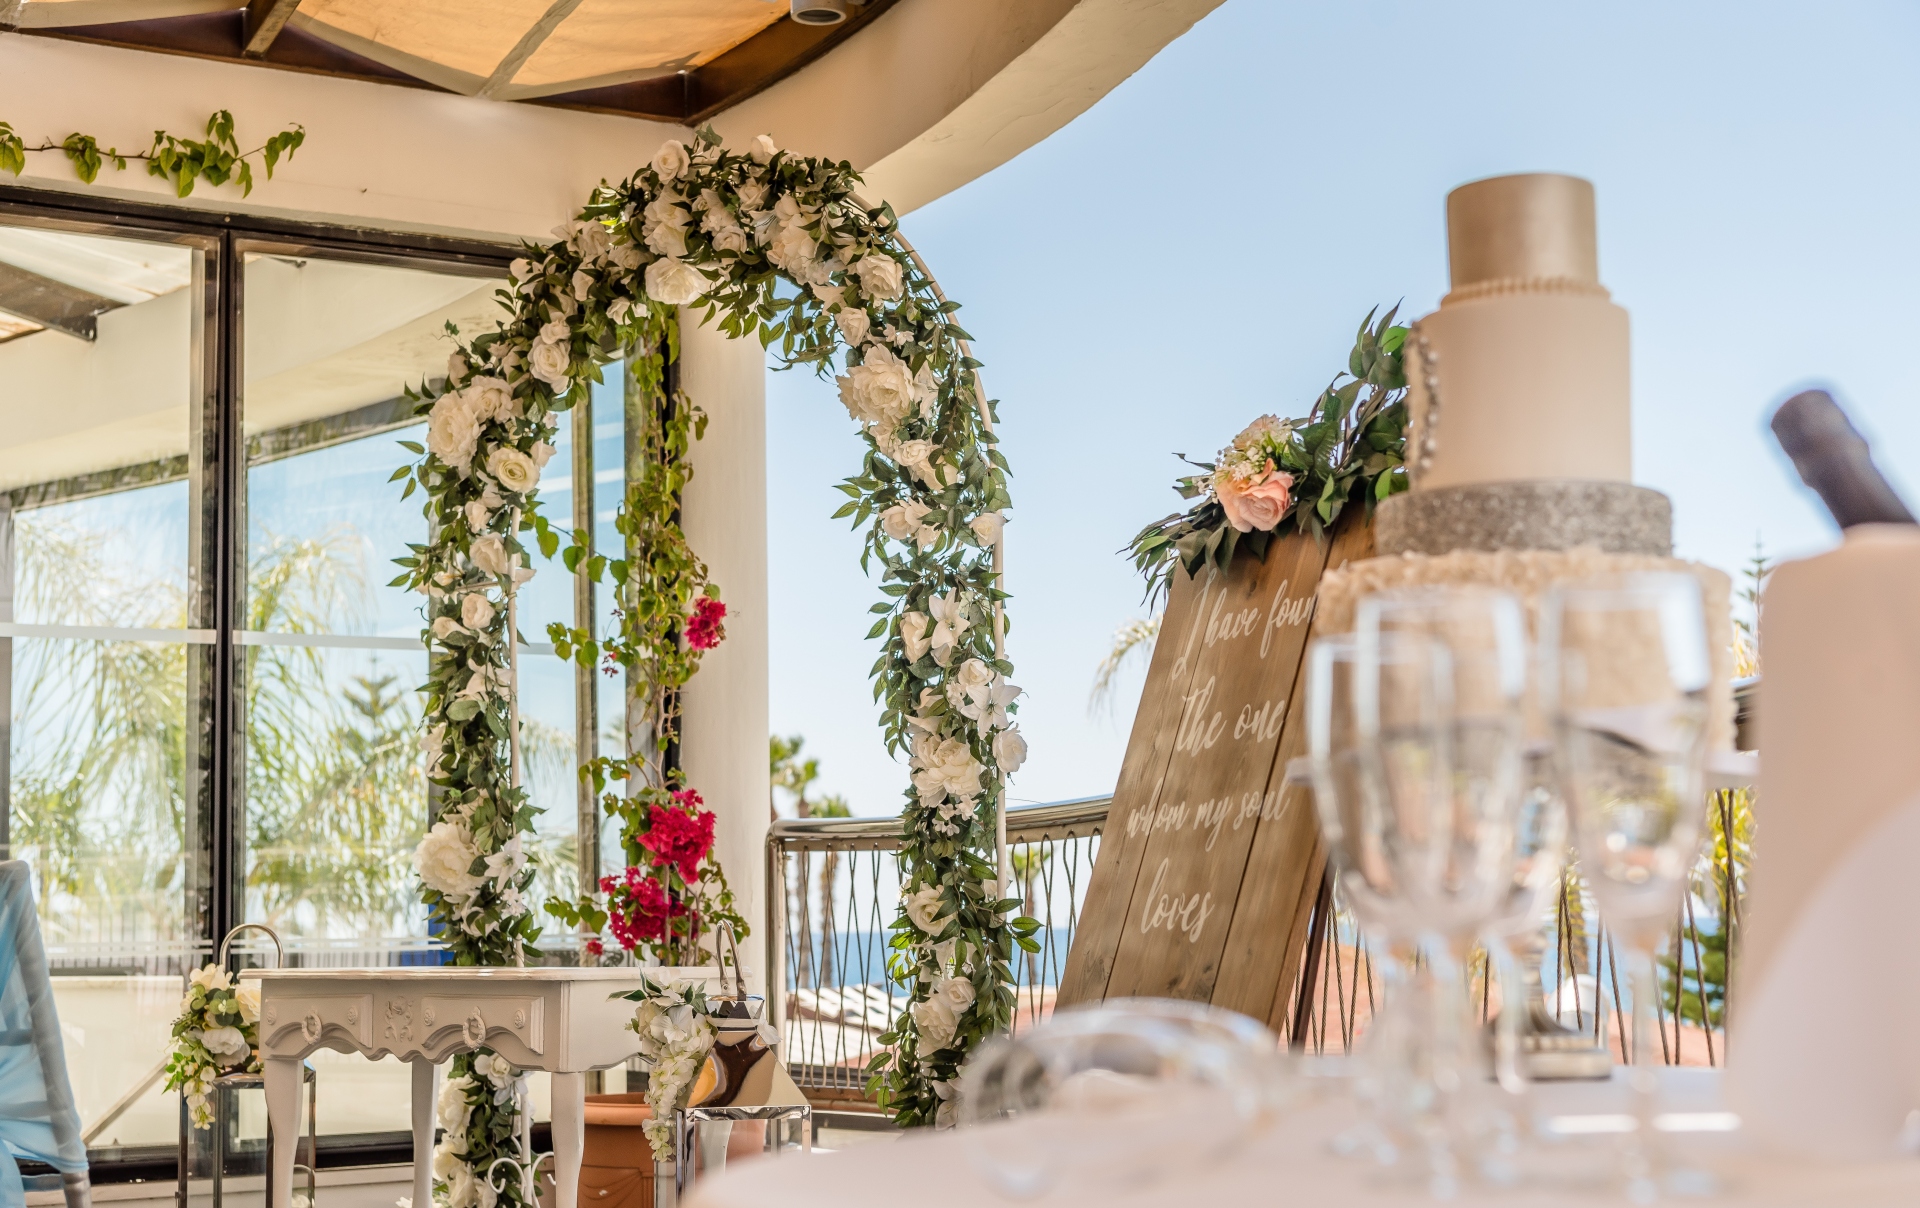 Book your wedding day in Louis Ledra Beach Paphos